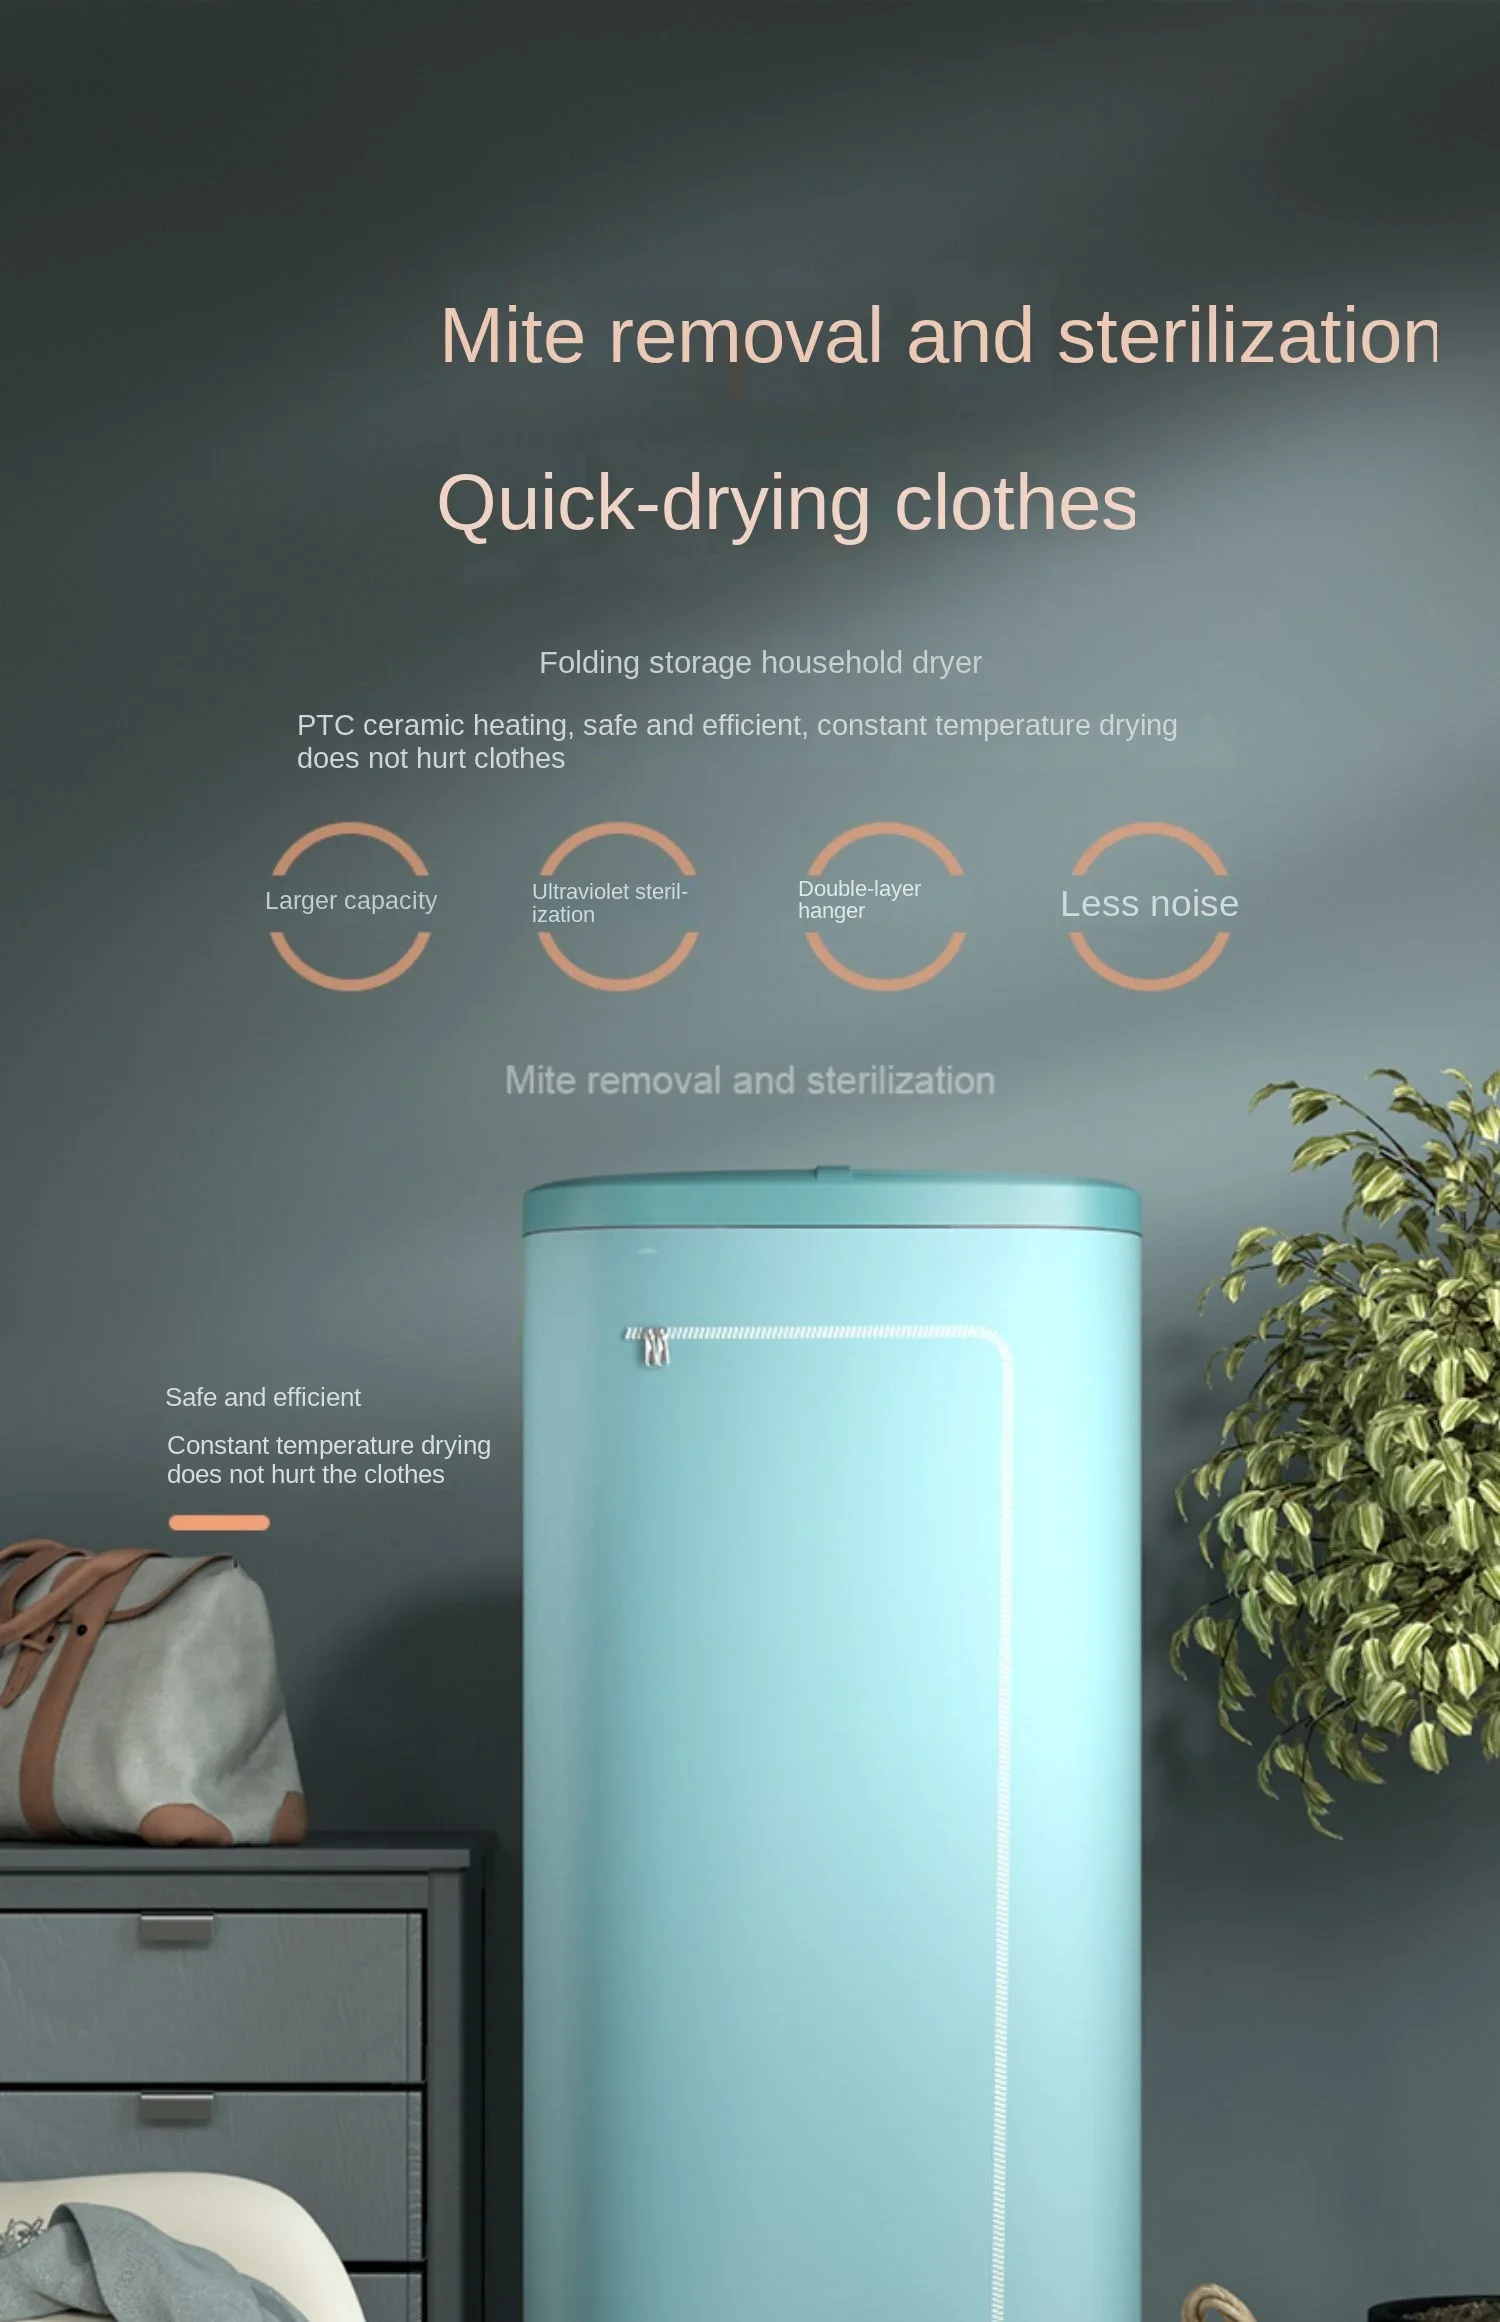 

220V Portable Clothes Dryer - Get Your Clothes Dry Quickly and Easily